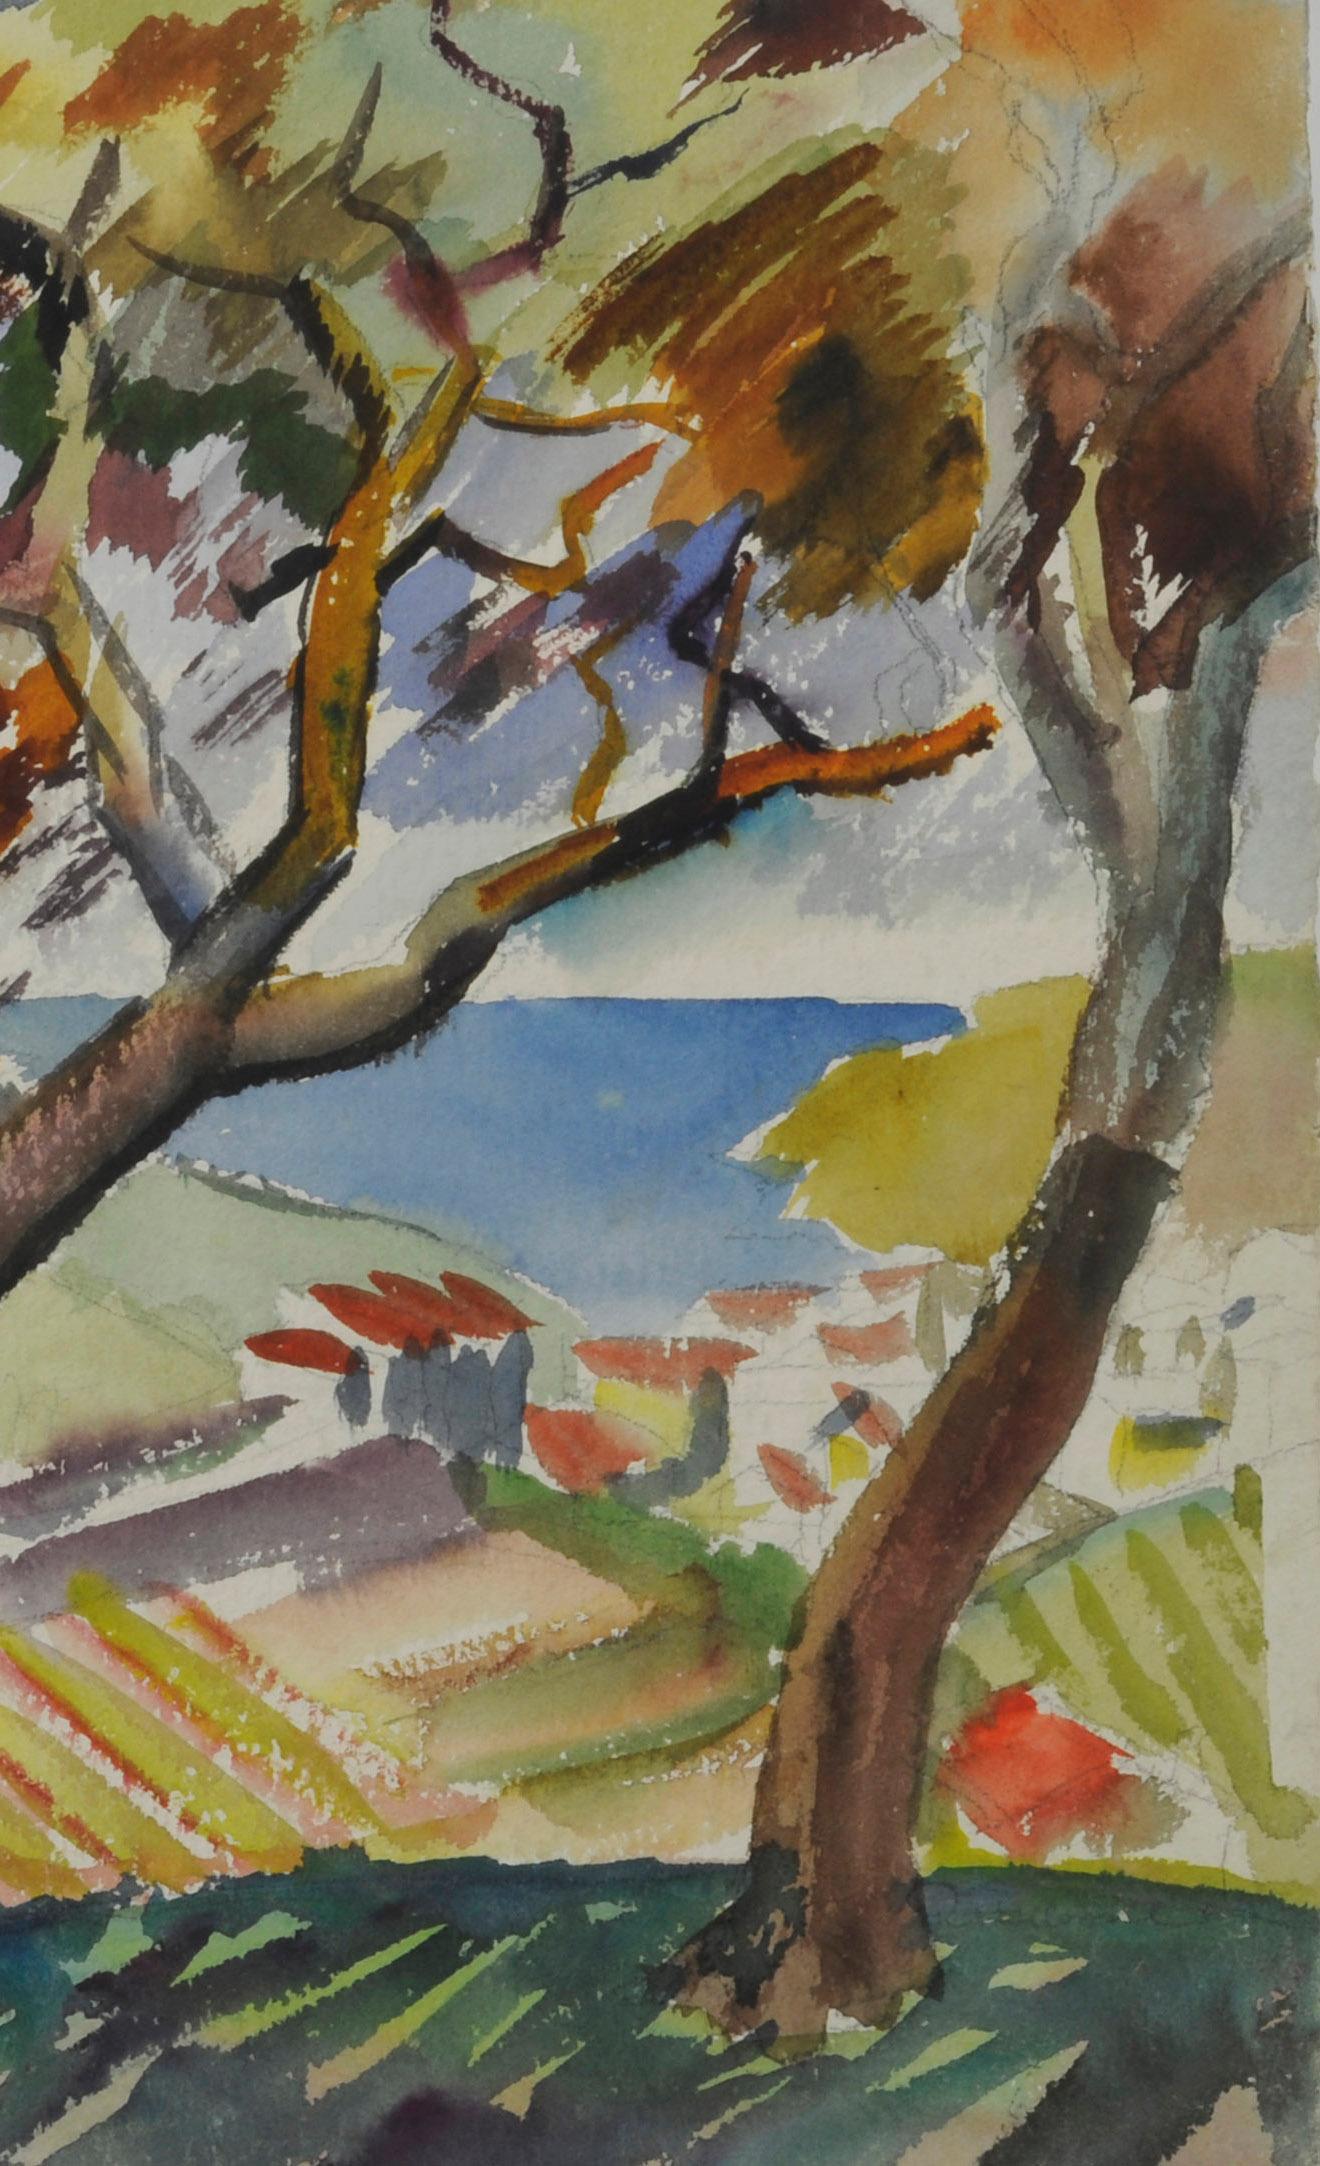 Trees Over the Vineyard
Watercolor on heavy paper, c. 1930
Signed with the estate stamp verso (see photo)
Sheet size: 16 1/2 x 19 1/8 inches
Condition: Excellent
Illustrated: Marbella Gallery Inc., Robert Hallowell, 1886-1939), No. 13
Provenance: